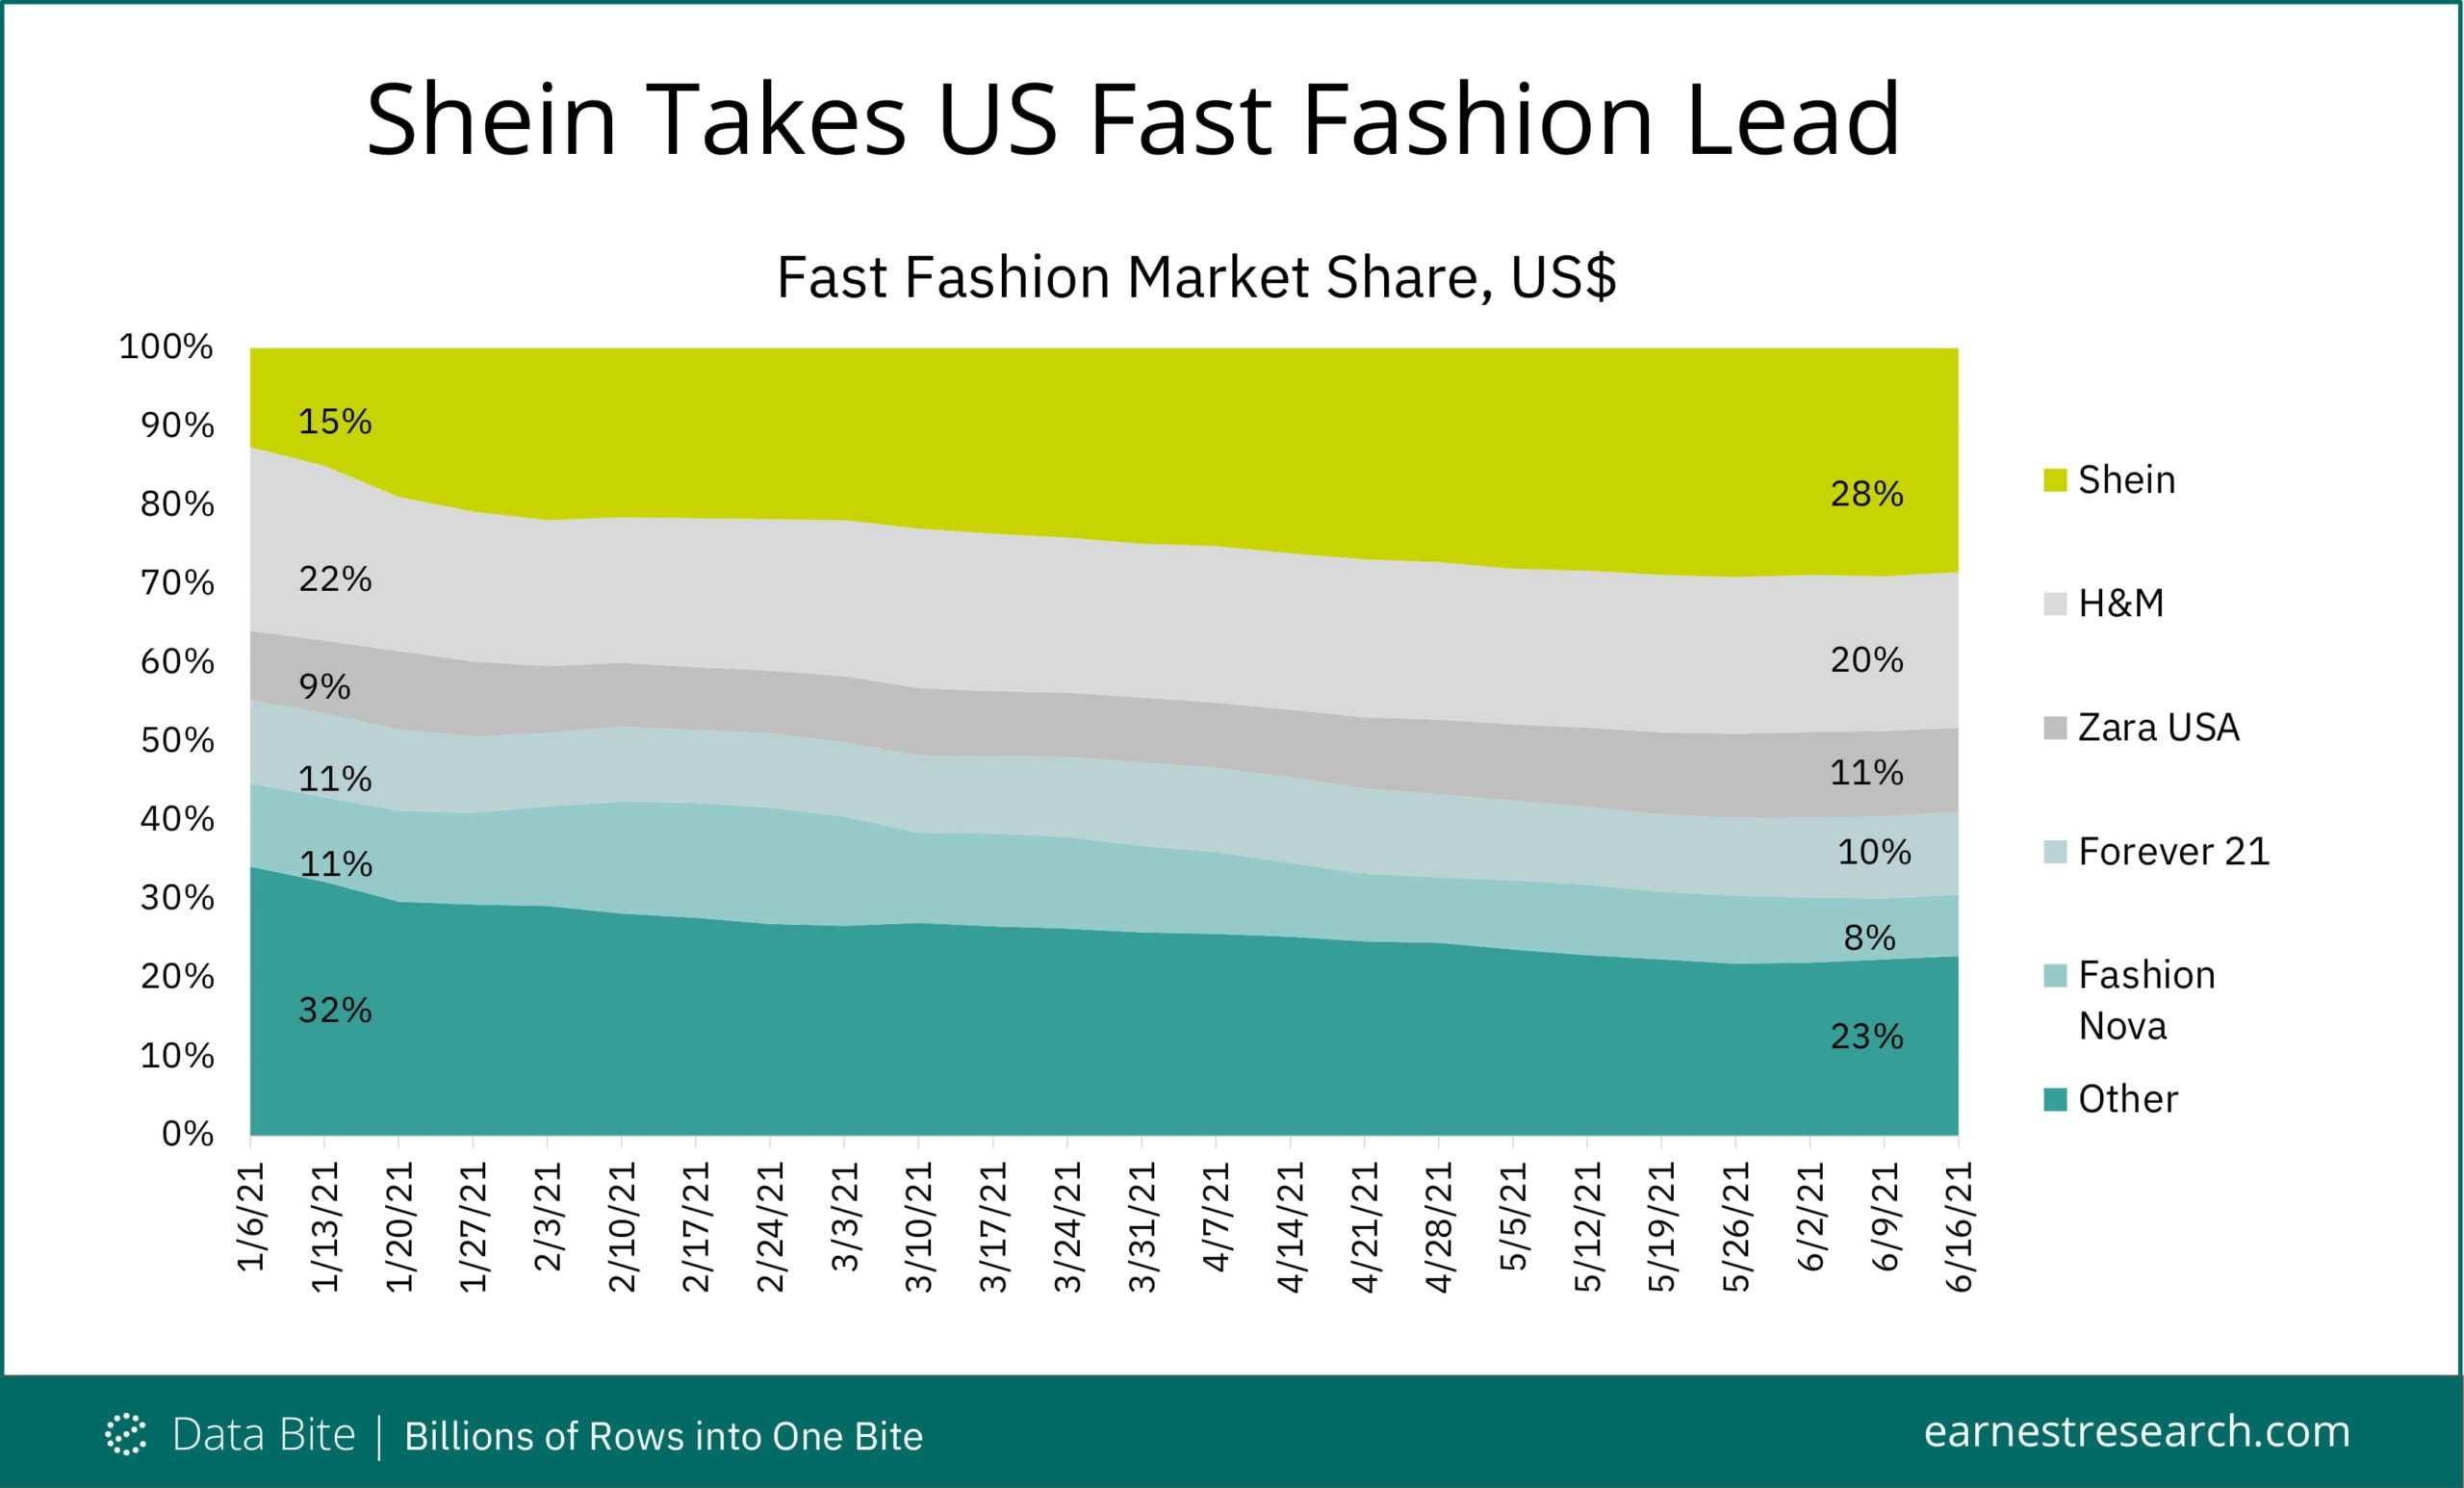 Shein Partners With Forever 21 to Build a Fast Fashion Empire - Brightly